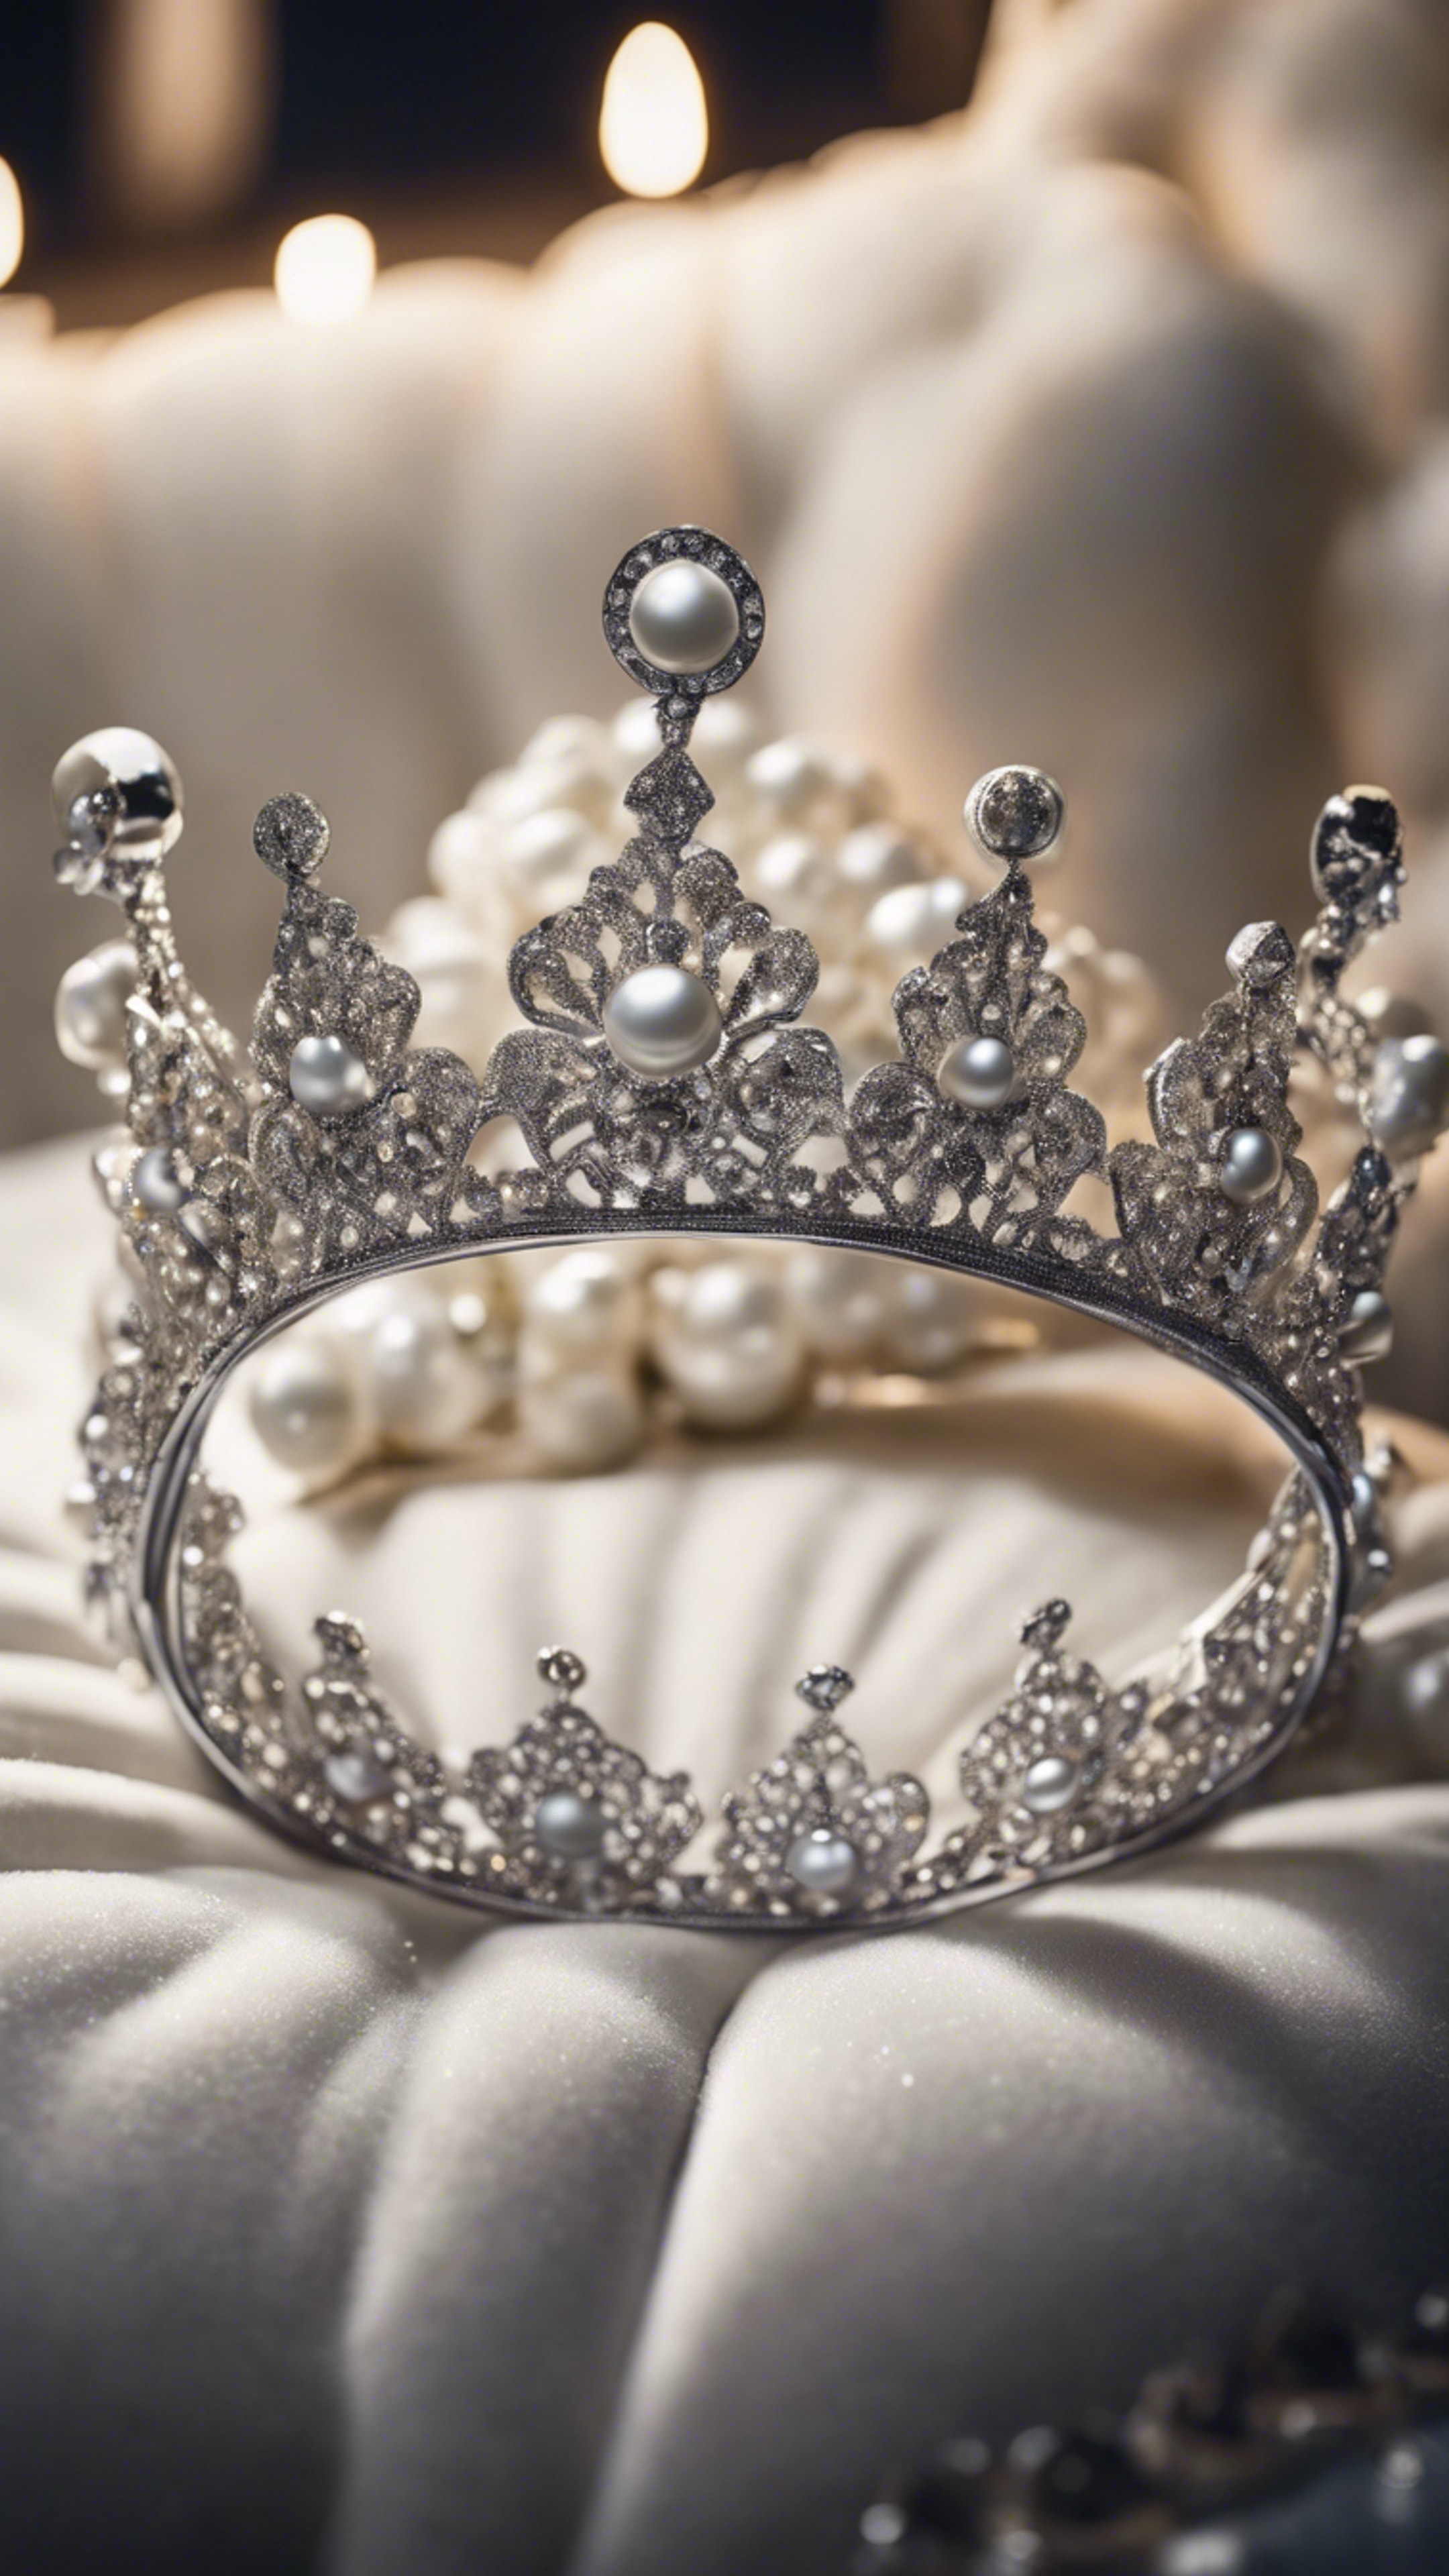 A classic silver crown embellished with pearls and diamonds lying on a white velvet cushion at night. Tapet[f90278dd6b1c4e9ca8cc]